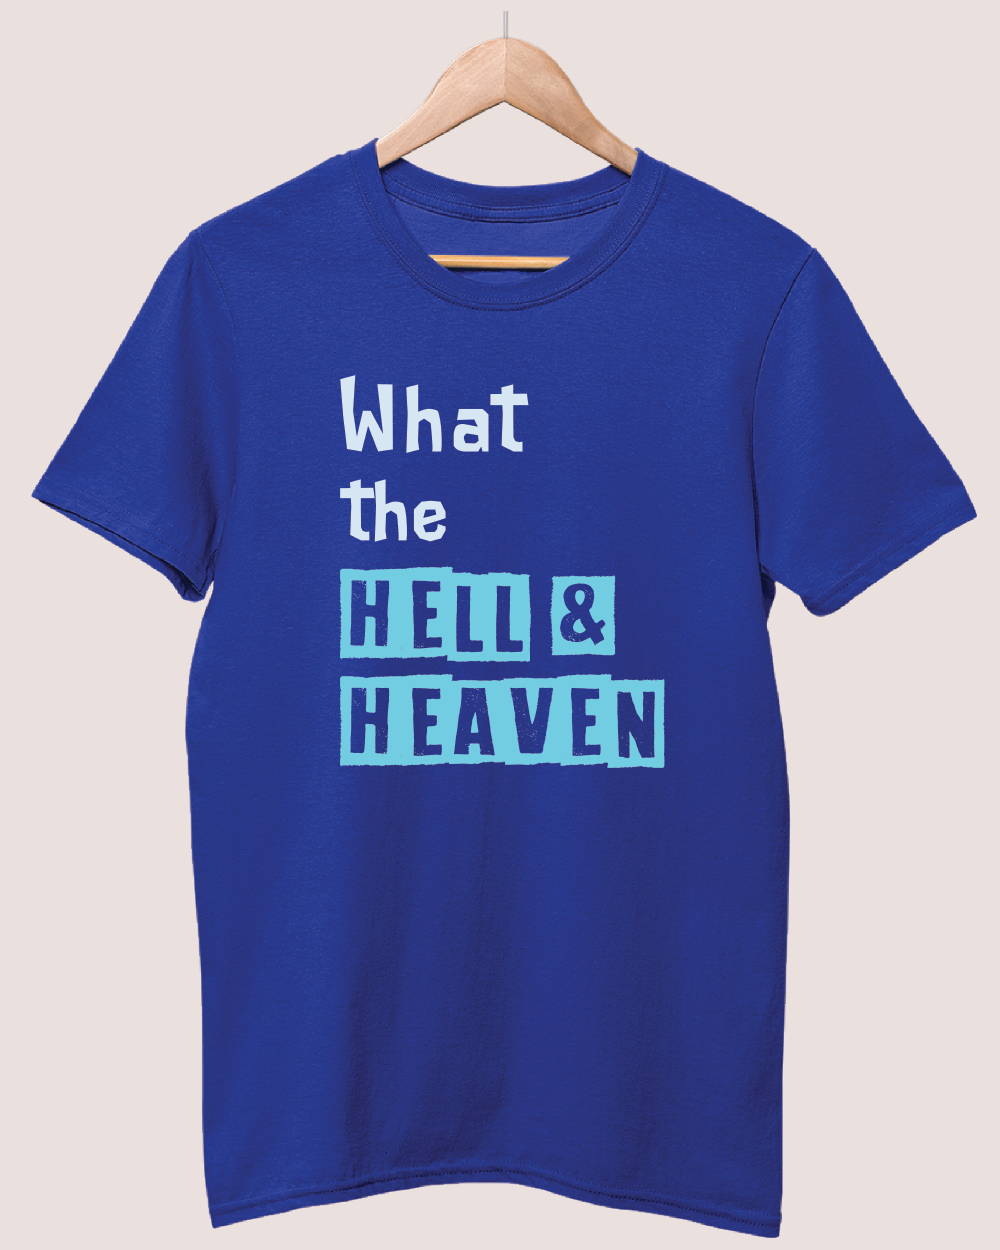 What the hell and heaven T-shirt